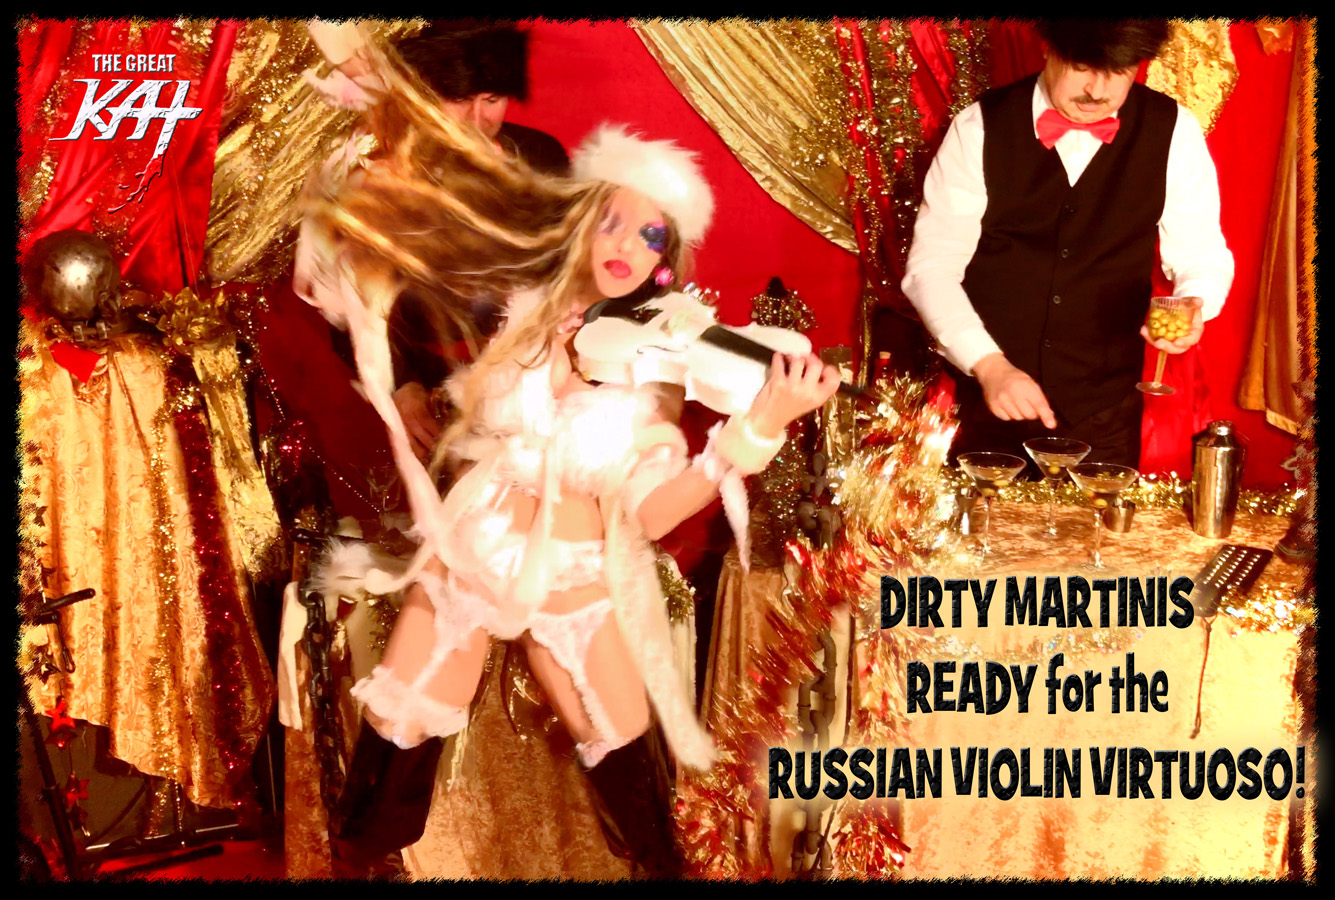 DIRTY MARTINIS READY for the RUSSIAN VIOLIN VIRTUOSO! From "CHEF GREAT KAT COOKS RUSSIAN CAVIAR AND BLINI WITH RIMSKY-KORSAKOV" VIDEO!!